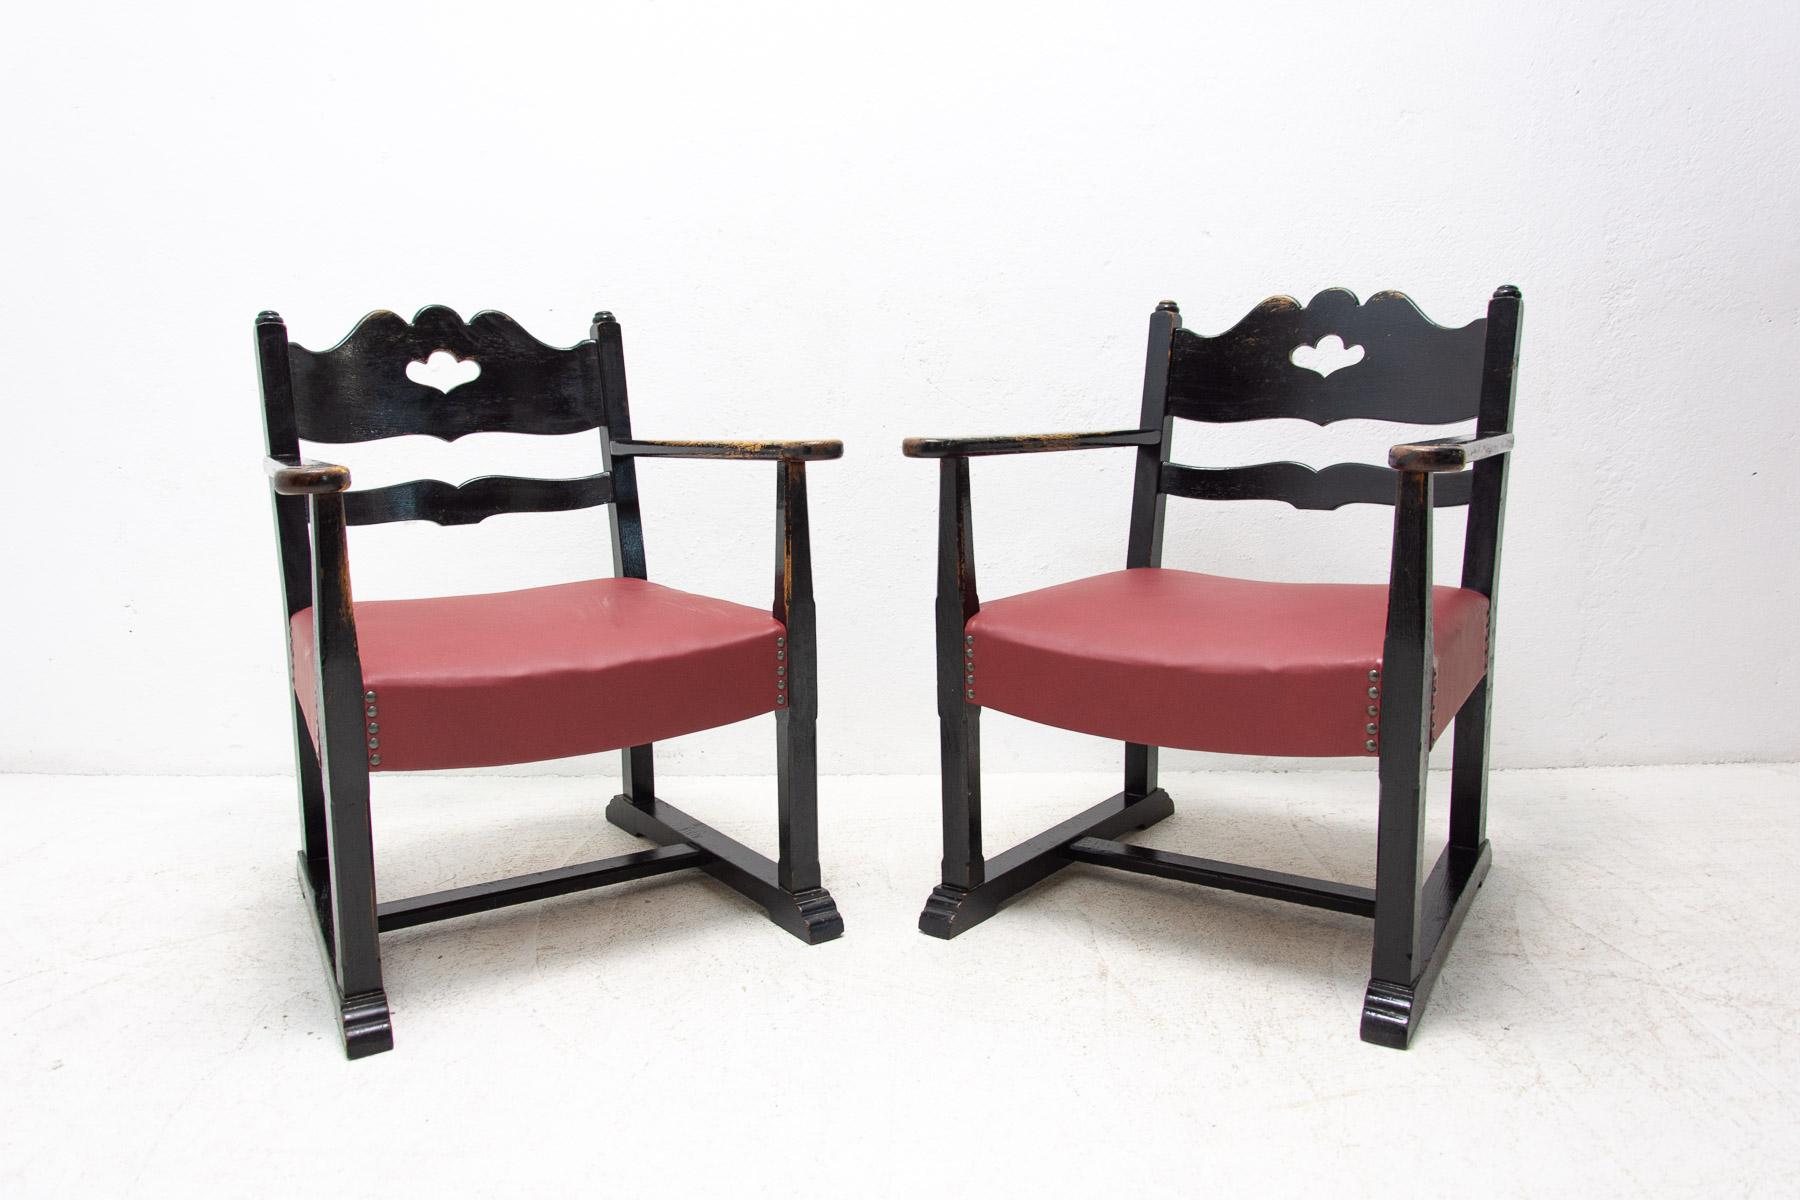 These beautiful Wiener Werkstätte armchairs were made in Wien, Austria, circa 1920s. These chairs are most reminiscent of Oscar Strnad’s work for Wiener Möbel around 1910-1925. It features a solid turned ash frame. Newly upholstered in burgundy